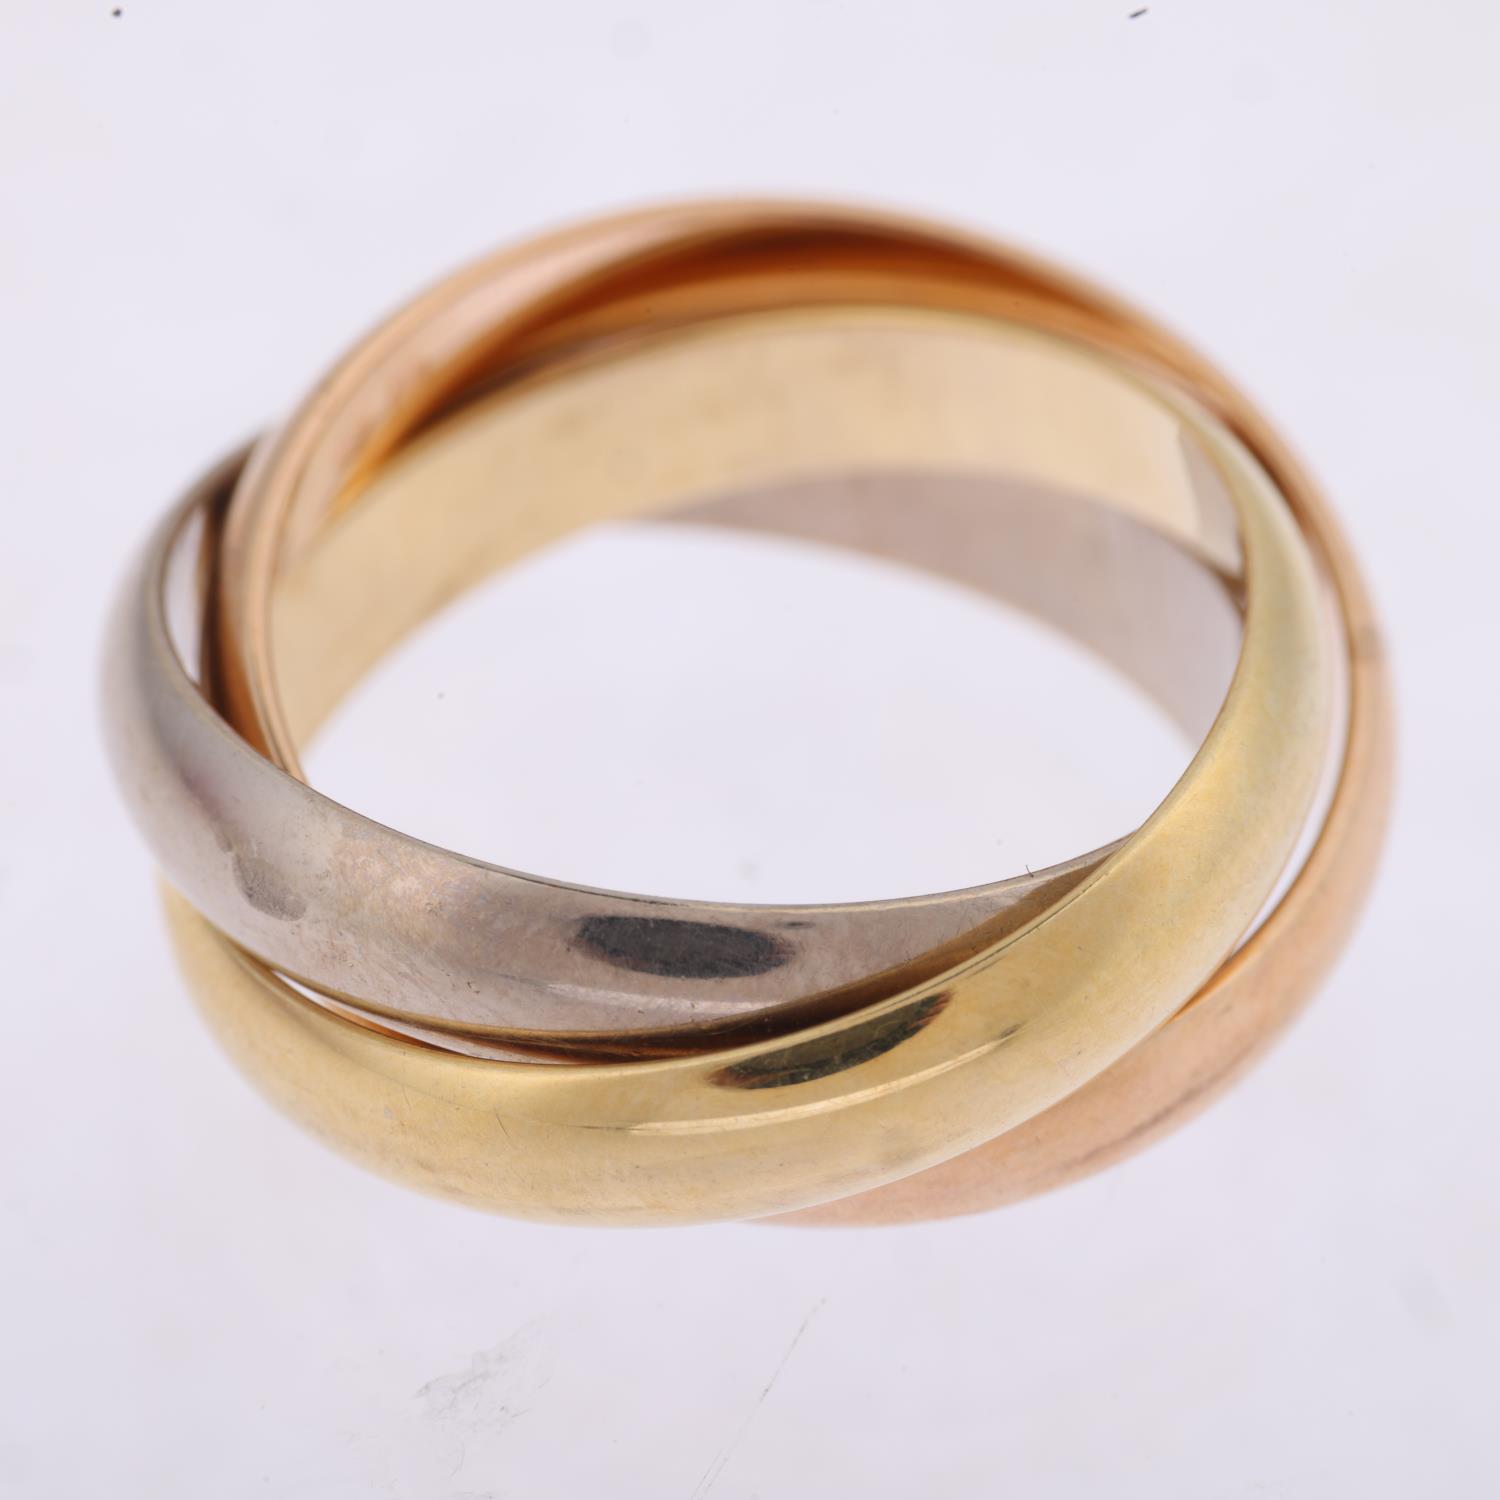 CARTIER - an 18ct three-colour gold Trinity ring, circa 2020, modelled as 3 entwined band rings, - Image 3 of 4